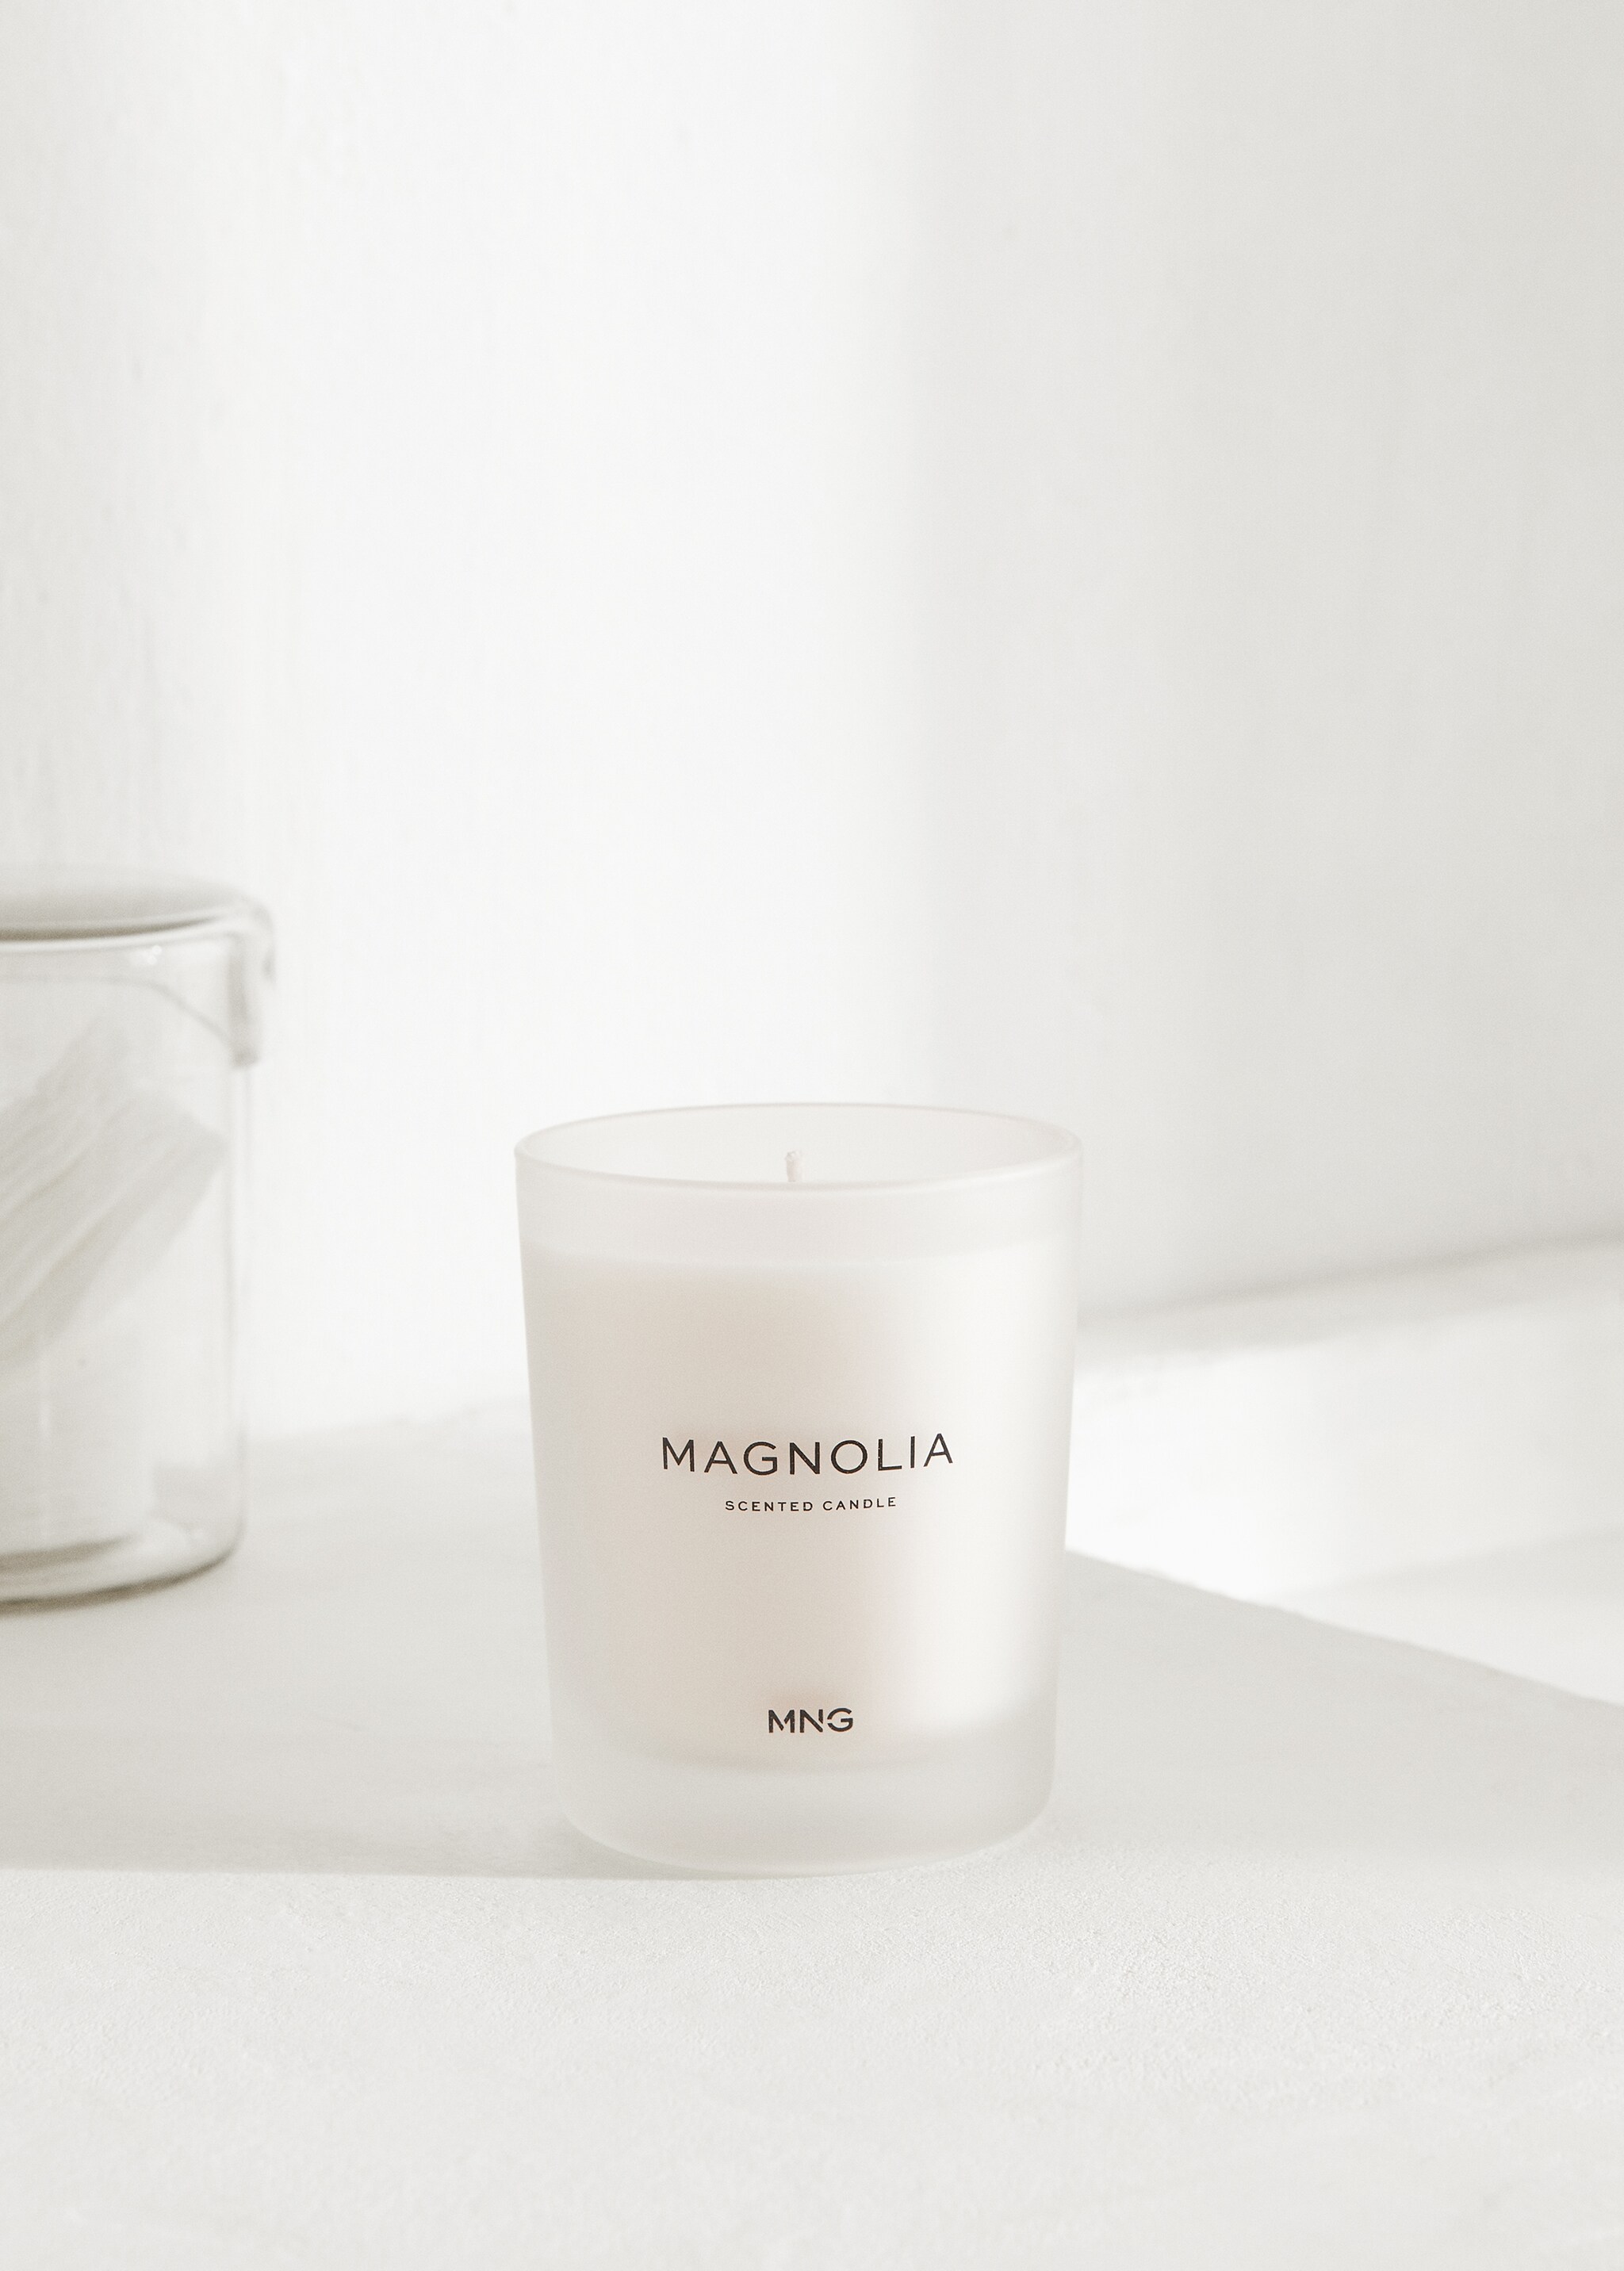 Magnolia scented candle  - General plane